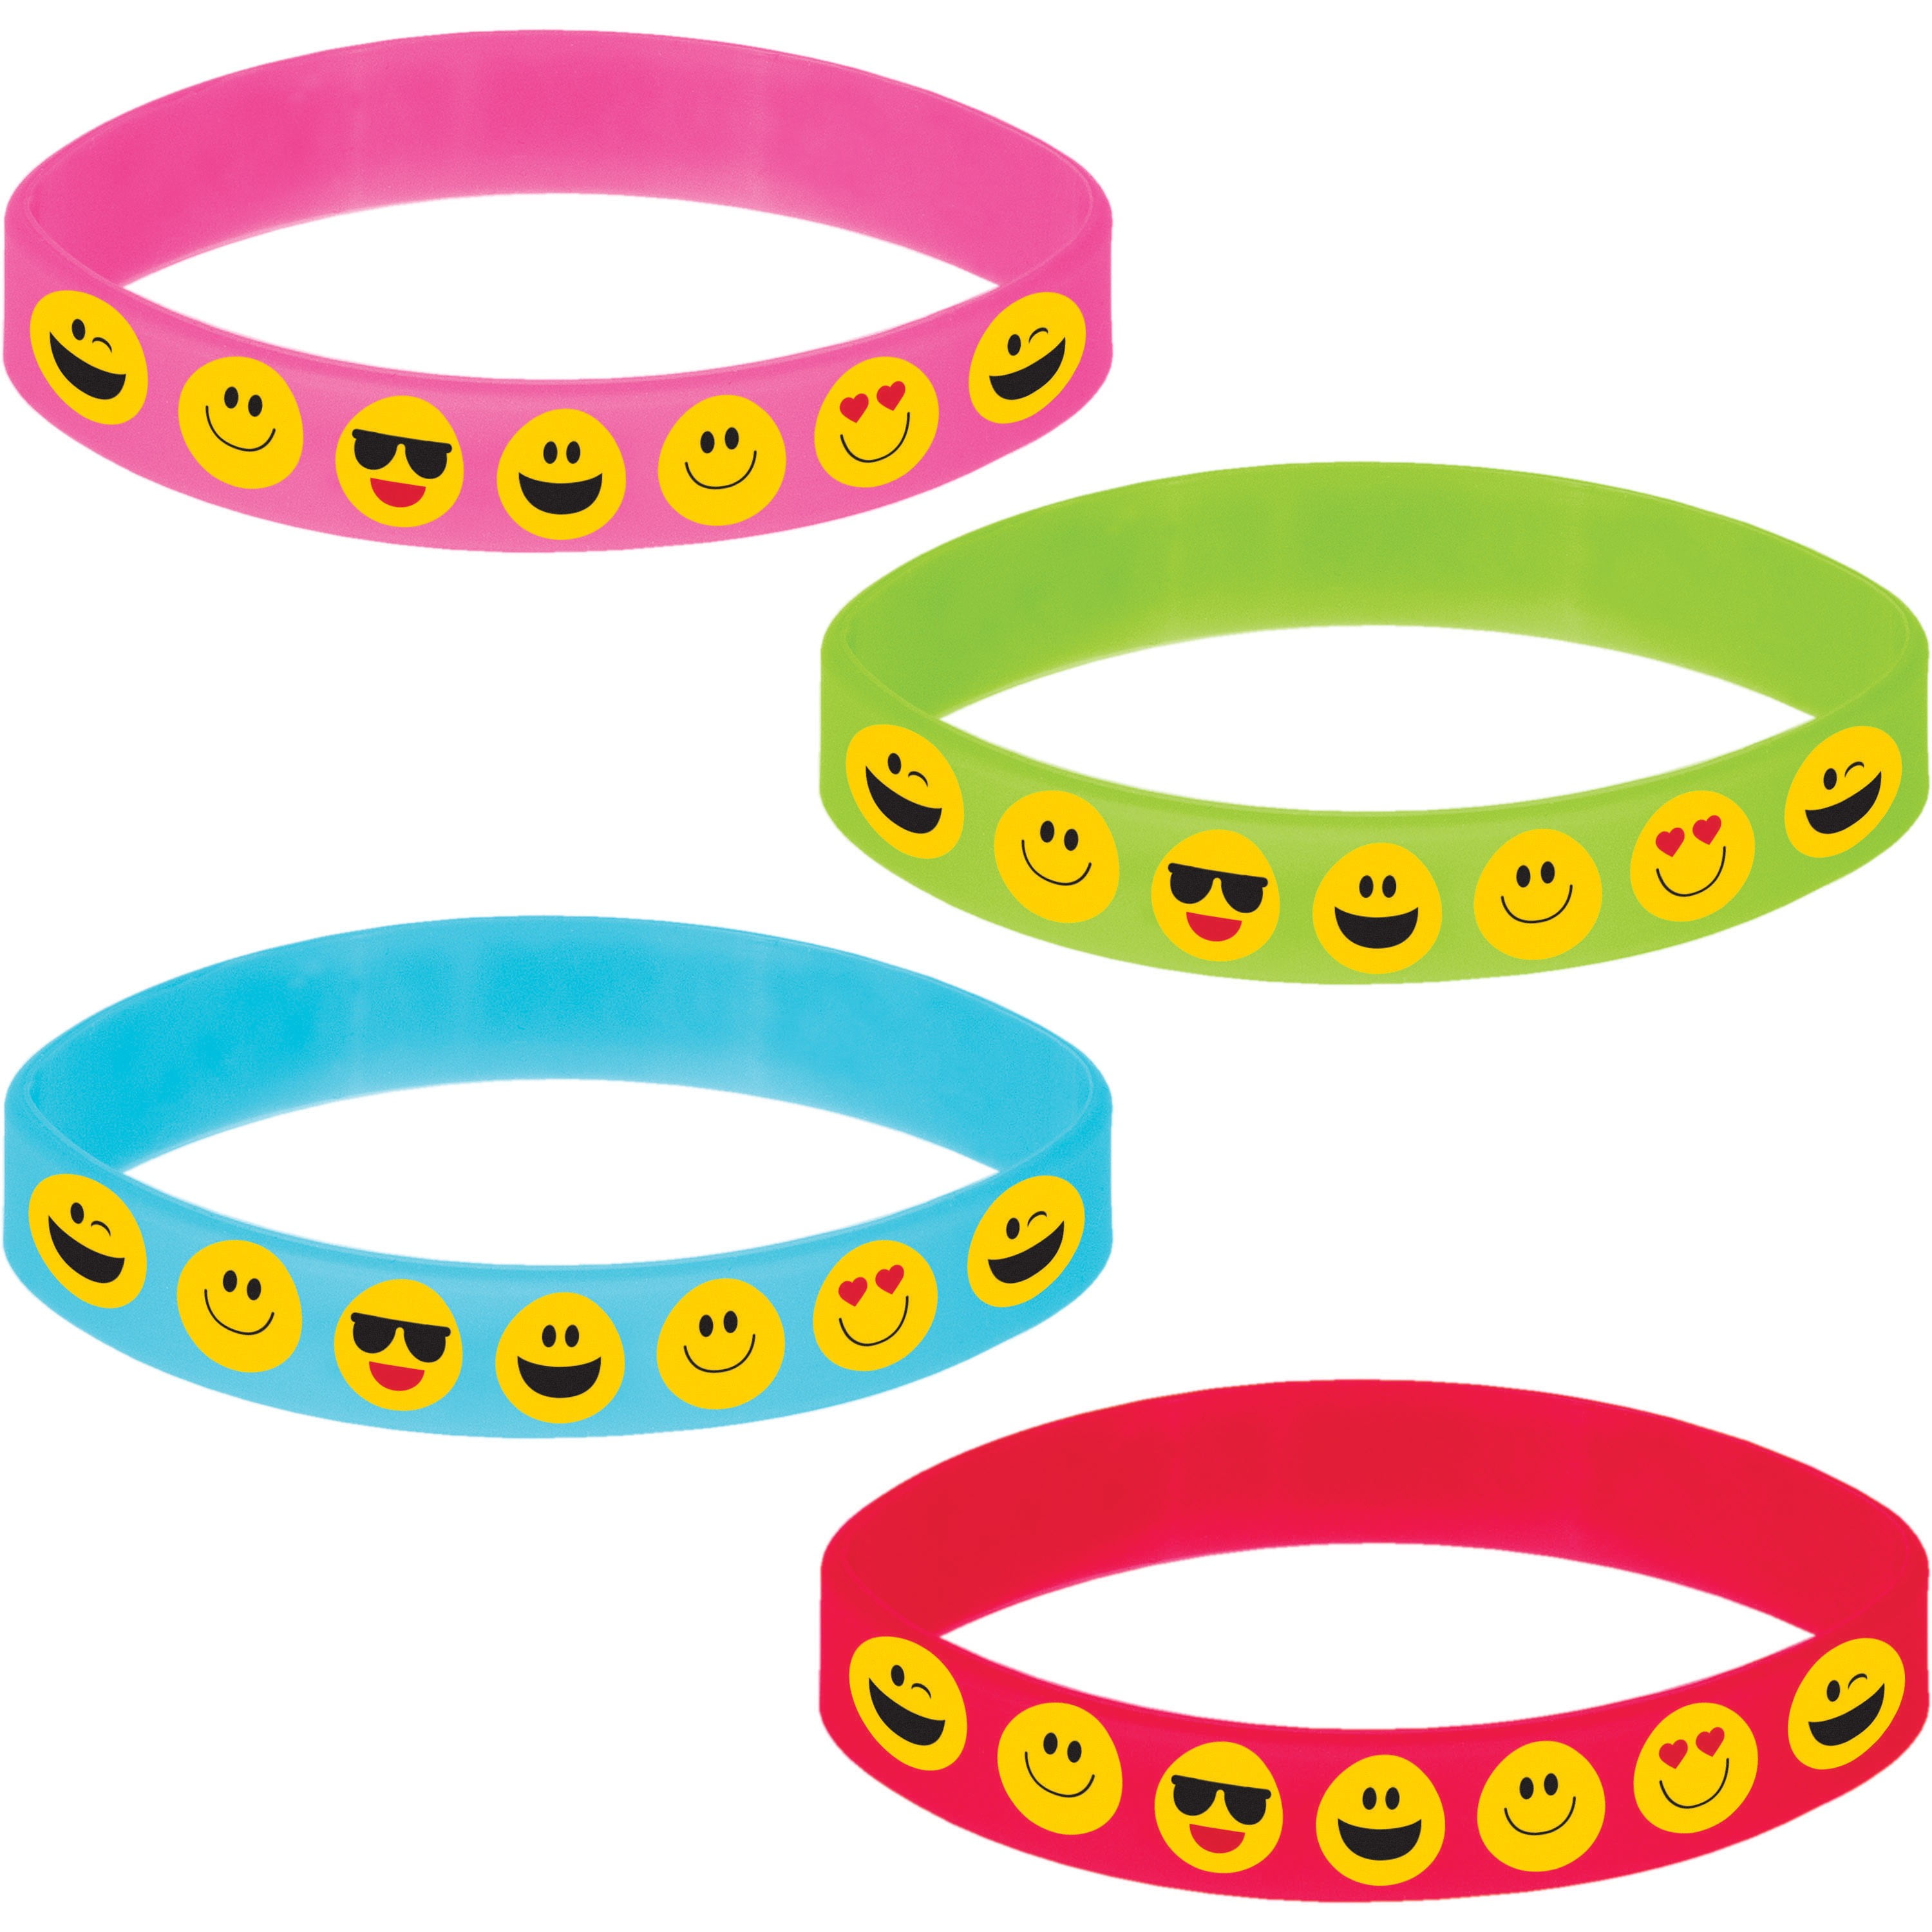 Details about   12 EMOJI BRACELETS RUBBER SILICONE EMOTICON CARNIVAL GOODY BAGS PRIZES PARTY 